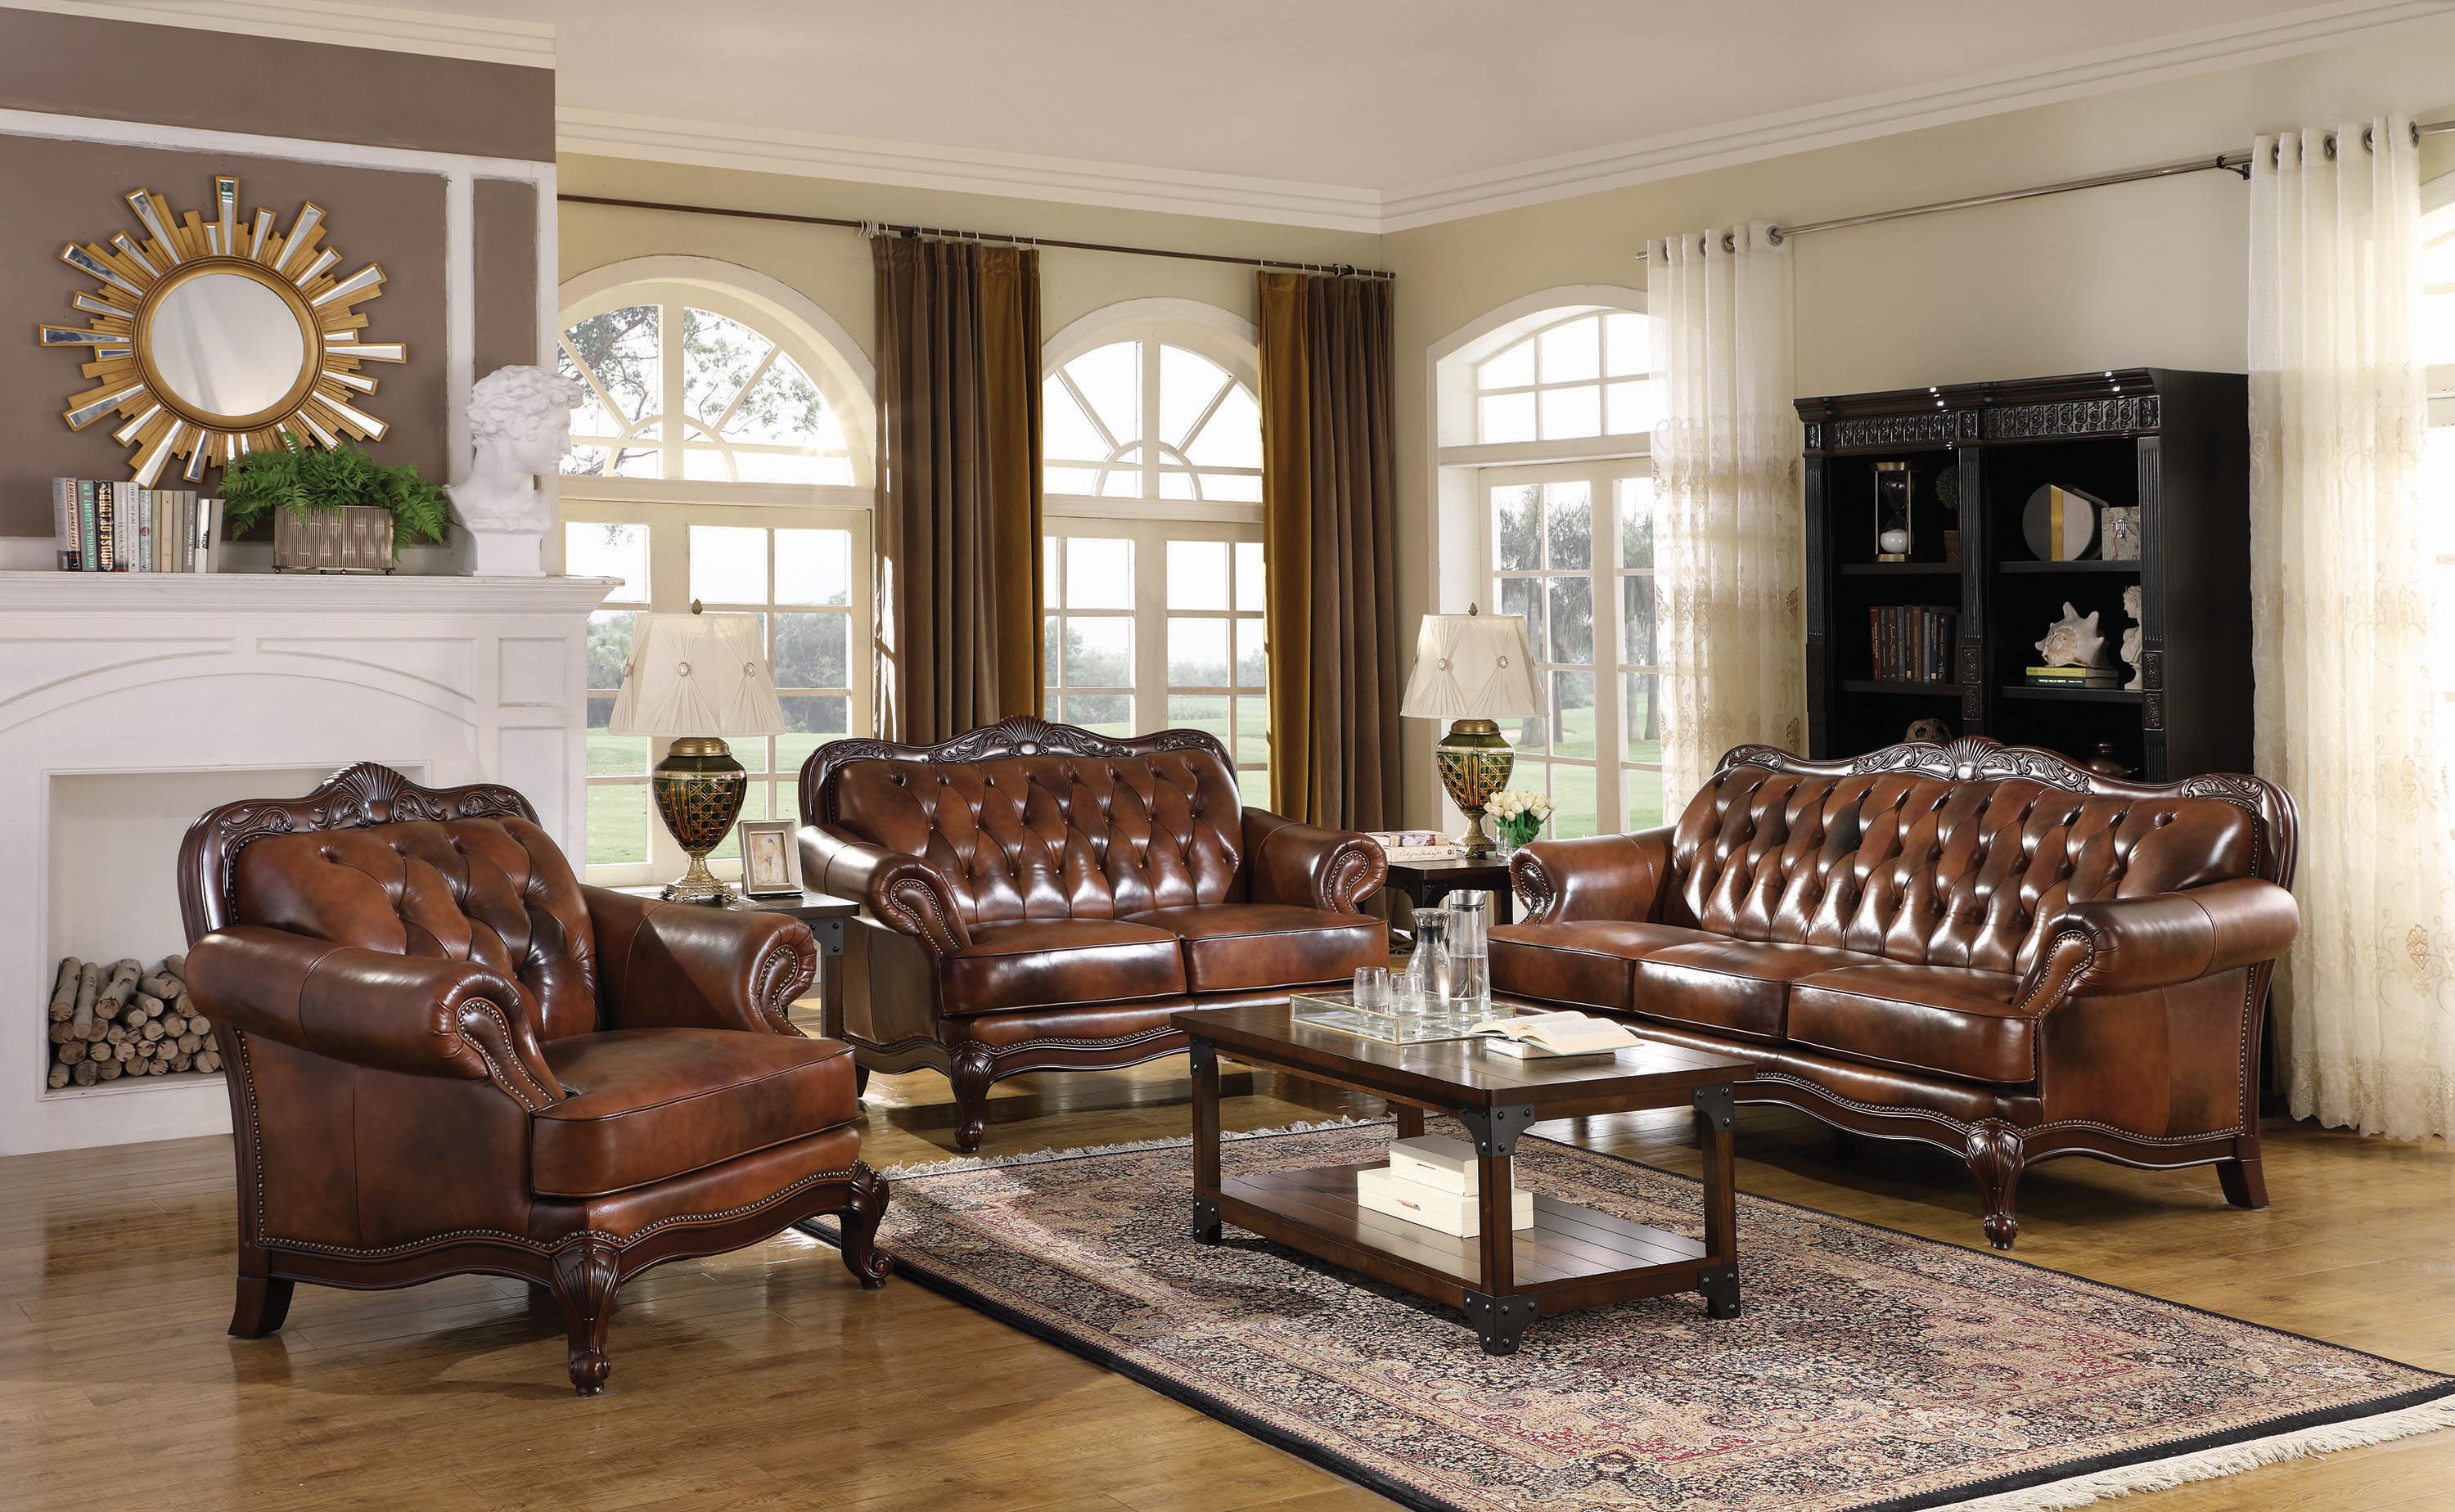 Classic Living Room Set 500681-S2 Victoria 500681-S2 in Brown Leather